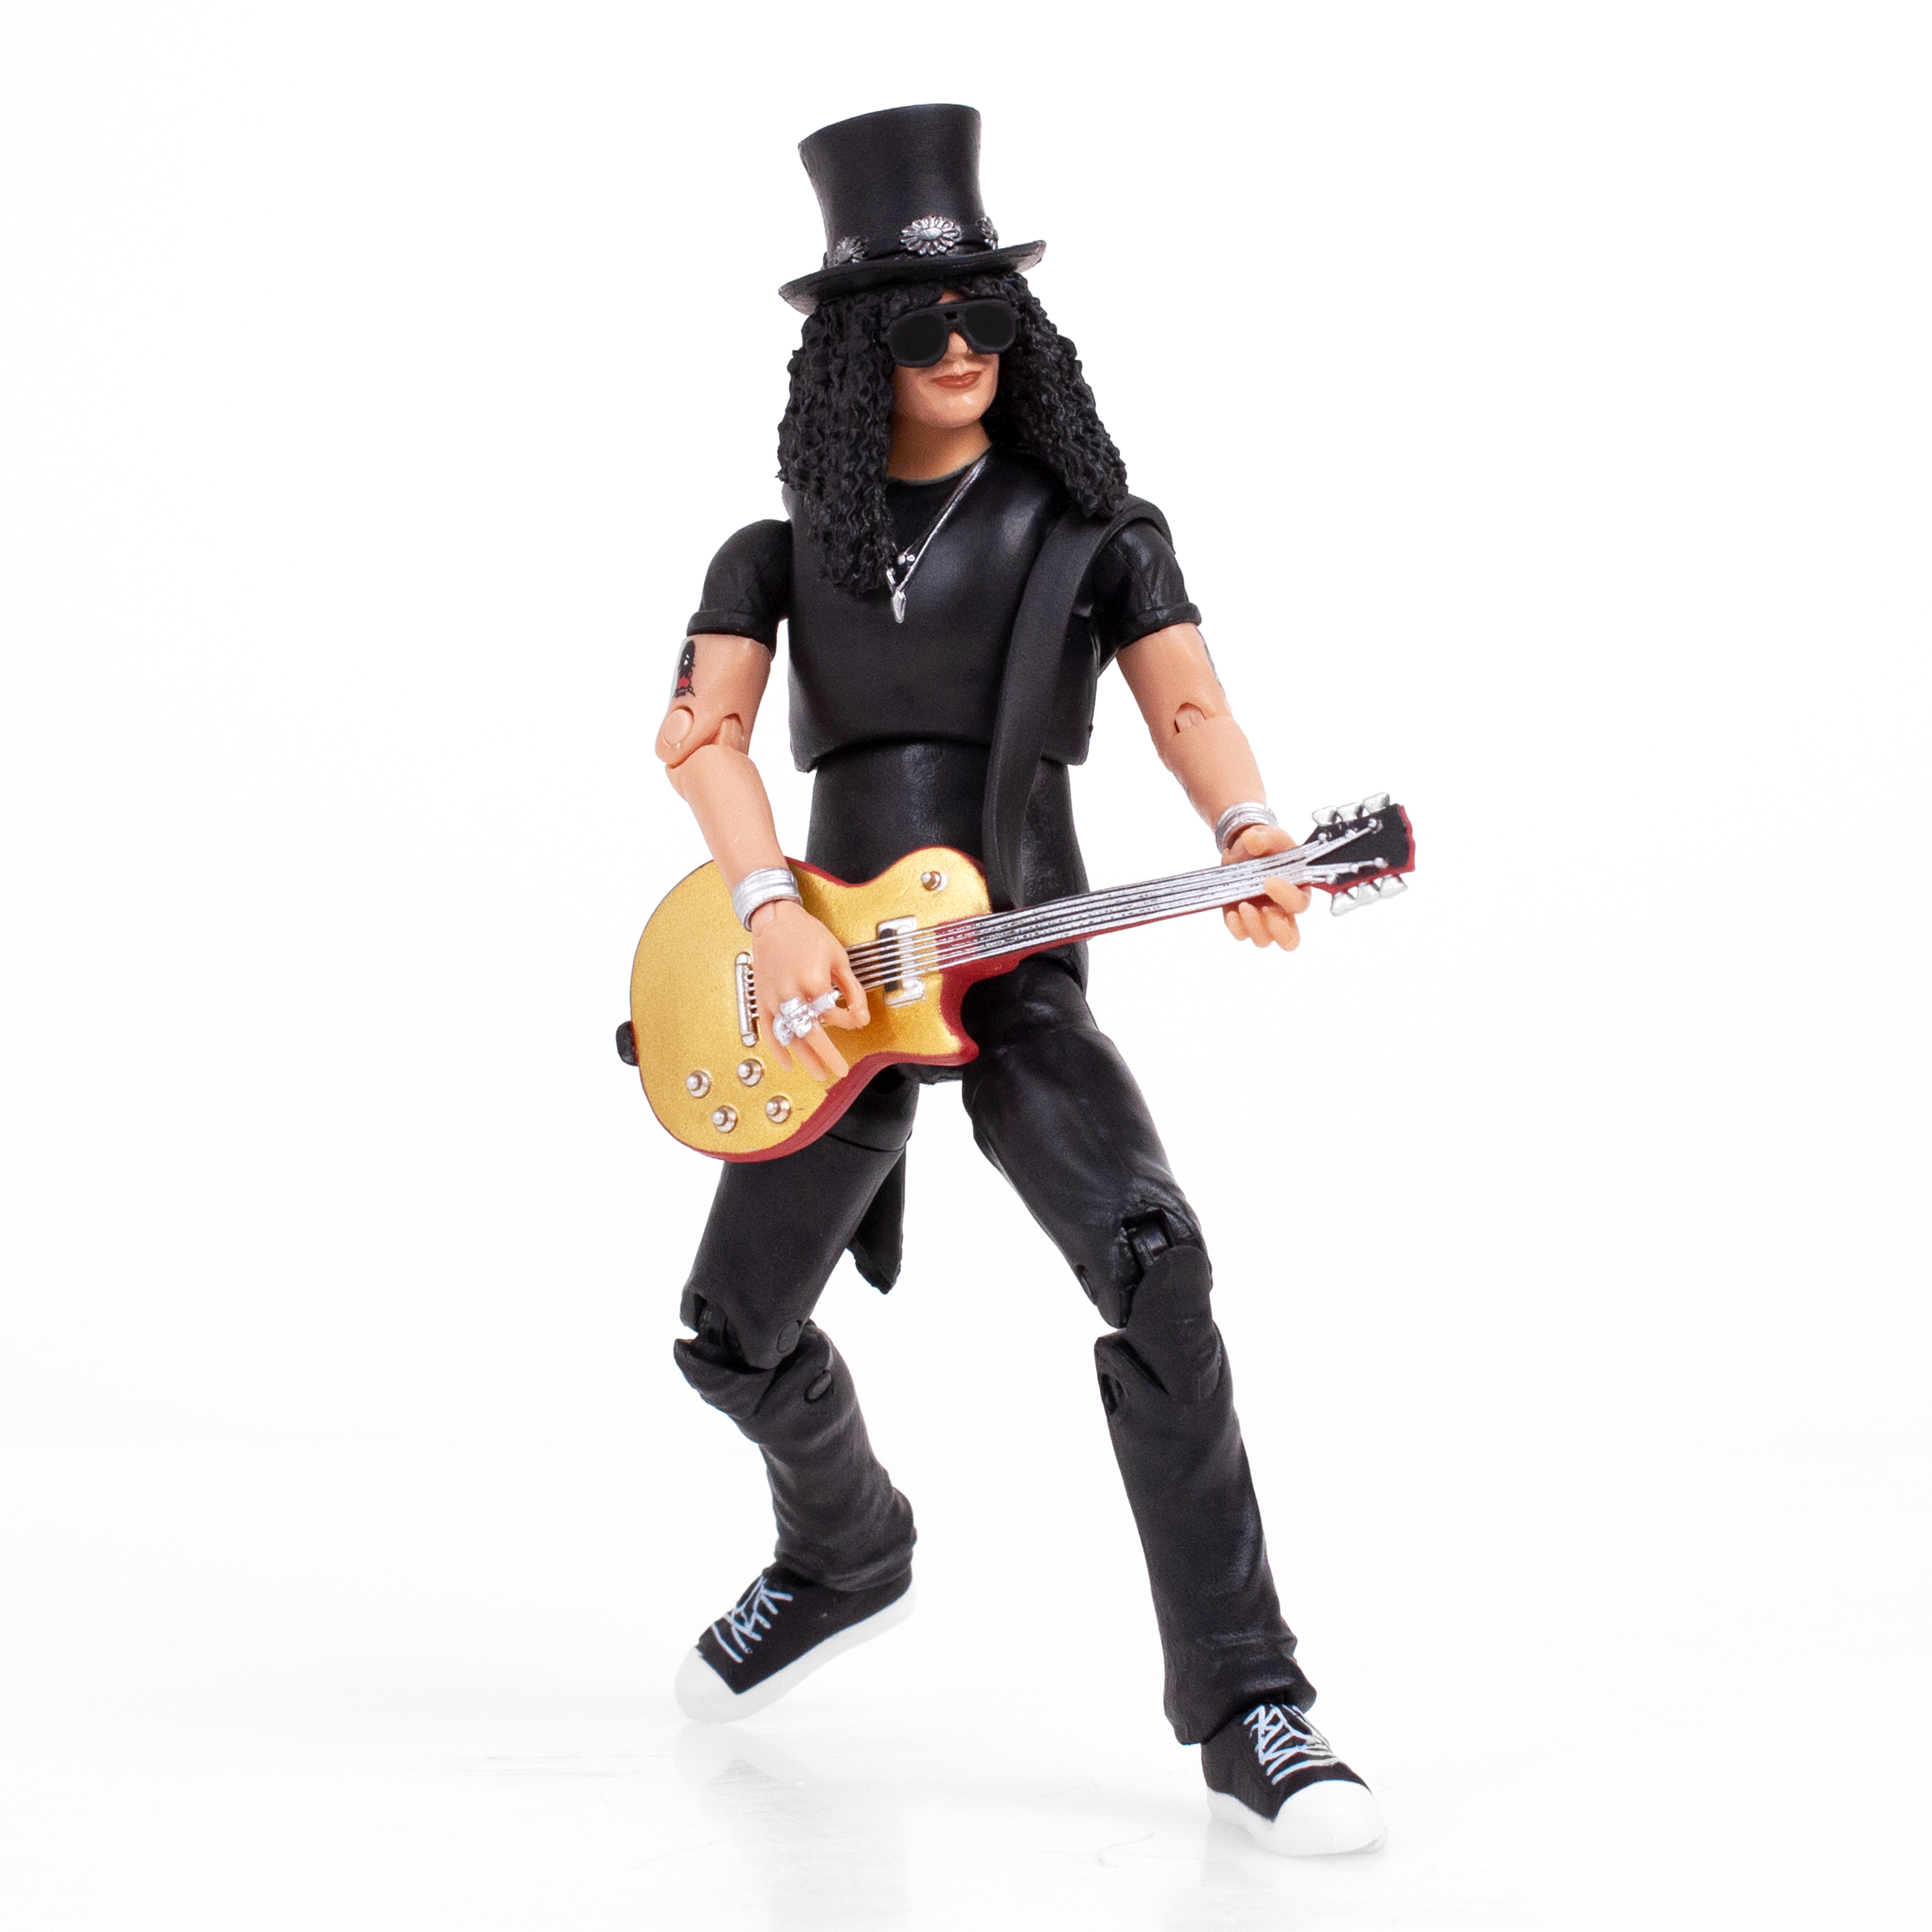 Guns N Roses Slash - The Loyal Subjects BST AXN 5" Action Figure - image 2 of 5